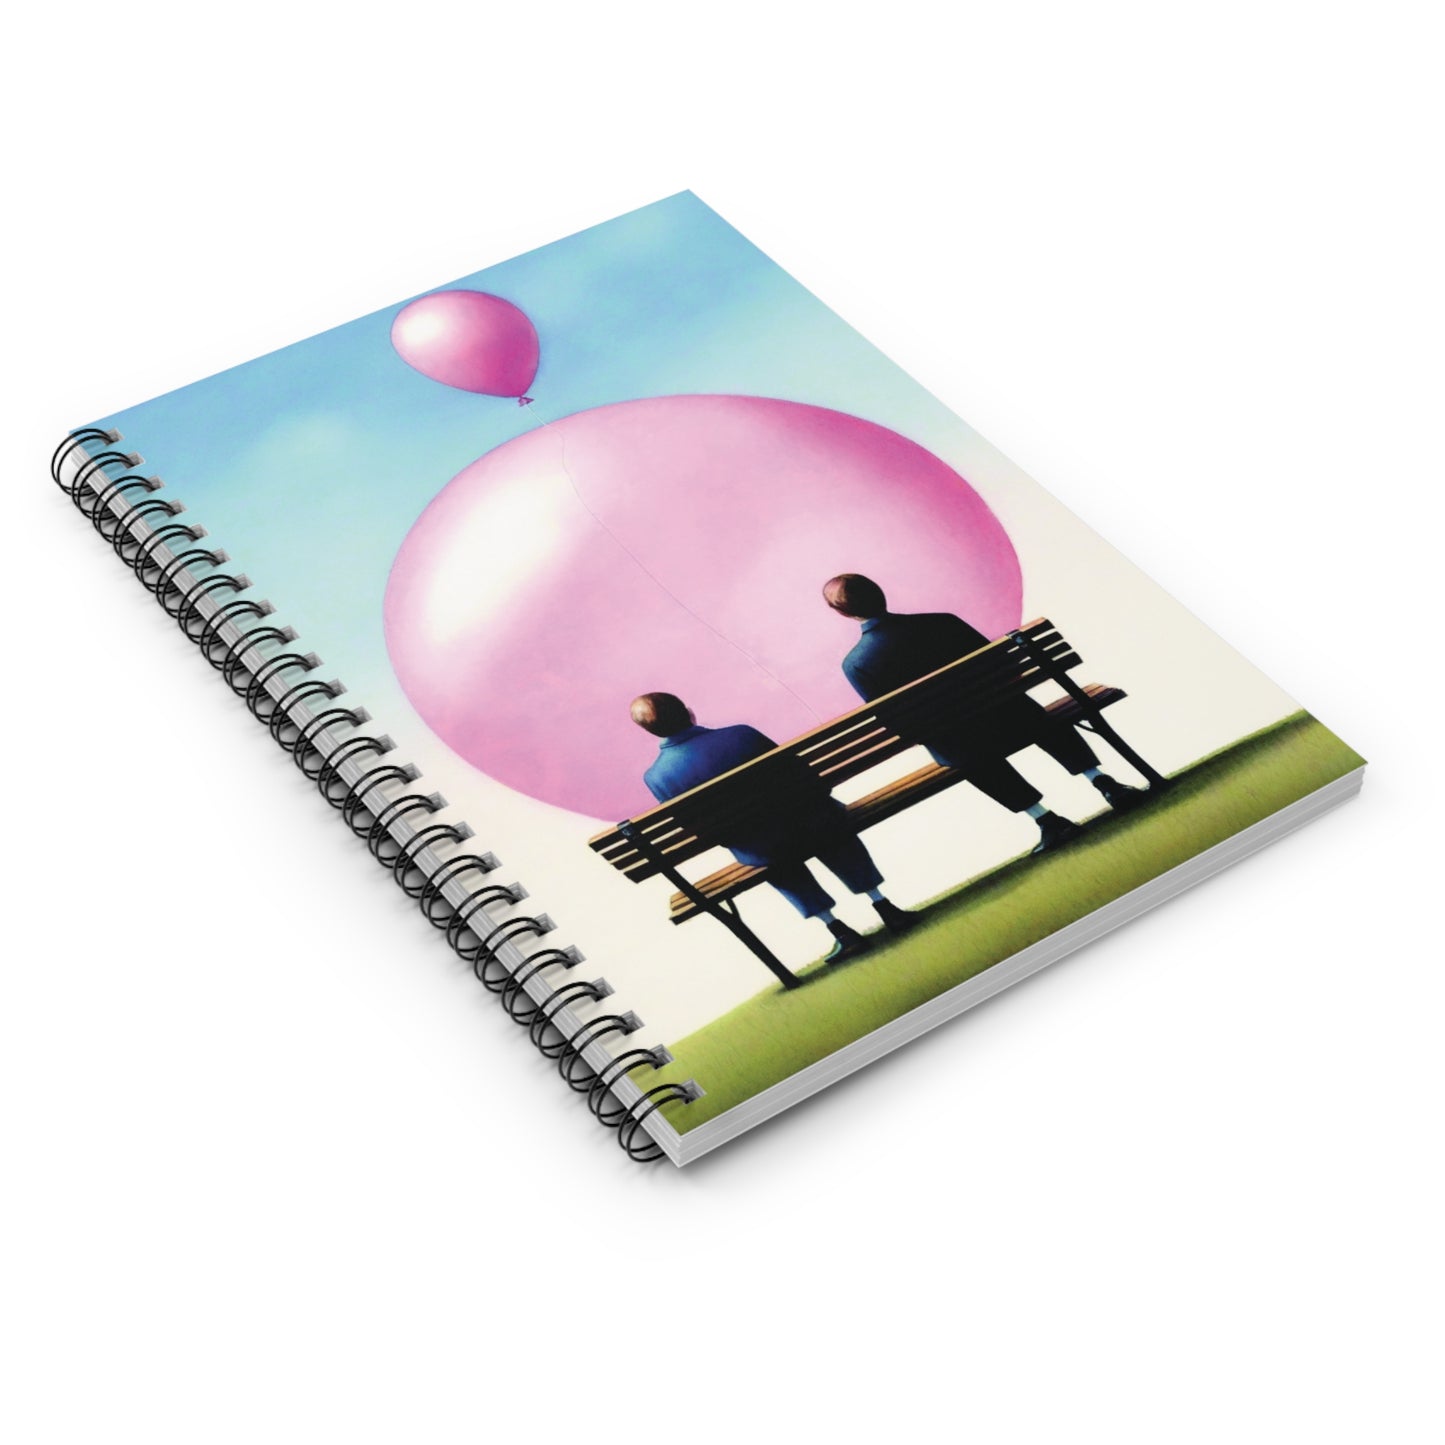 Balloon Daydreams spiral notebook - Ruled Line